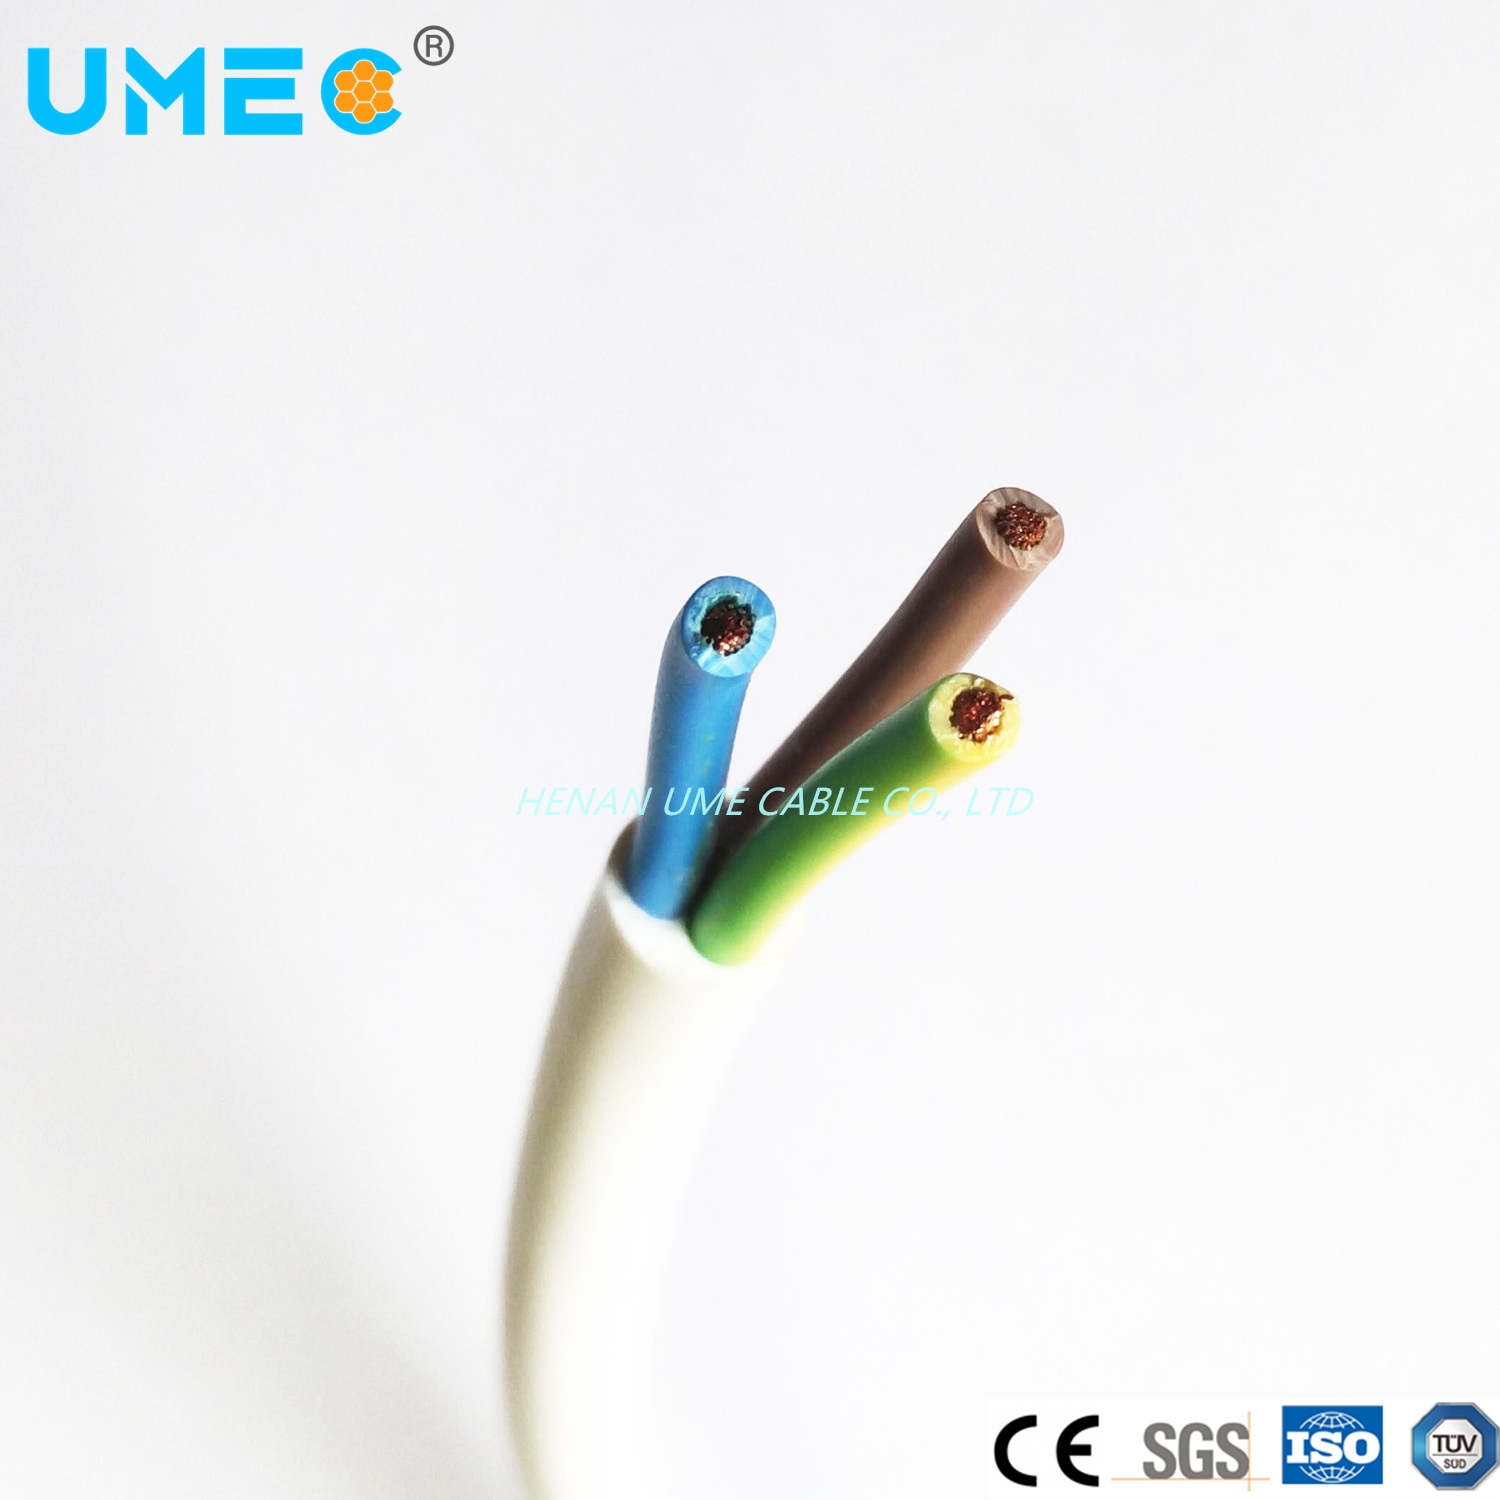 Electrical Extruded PVC Insulated Myym H05VV-F A05VV-F Round and Flat Copper Cable 2X0.75mm2 3X0.5mm2 Electric Cable